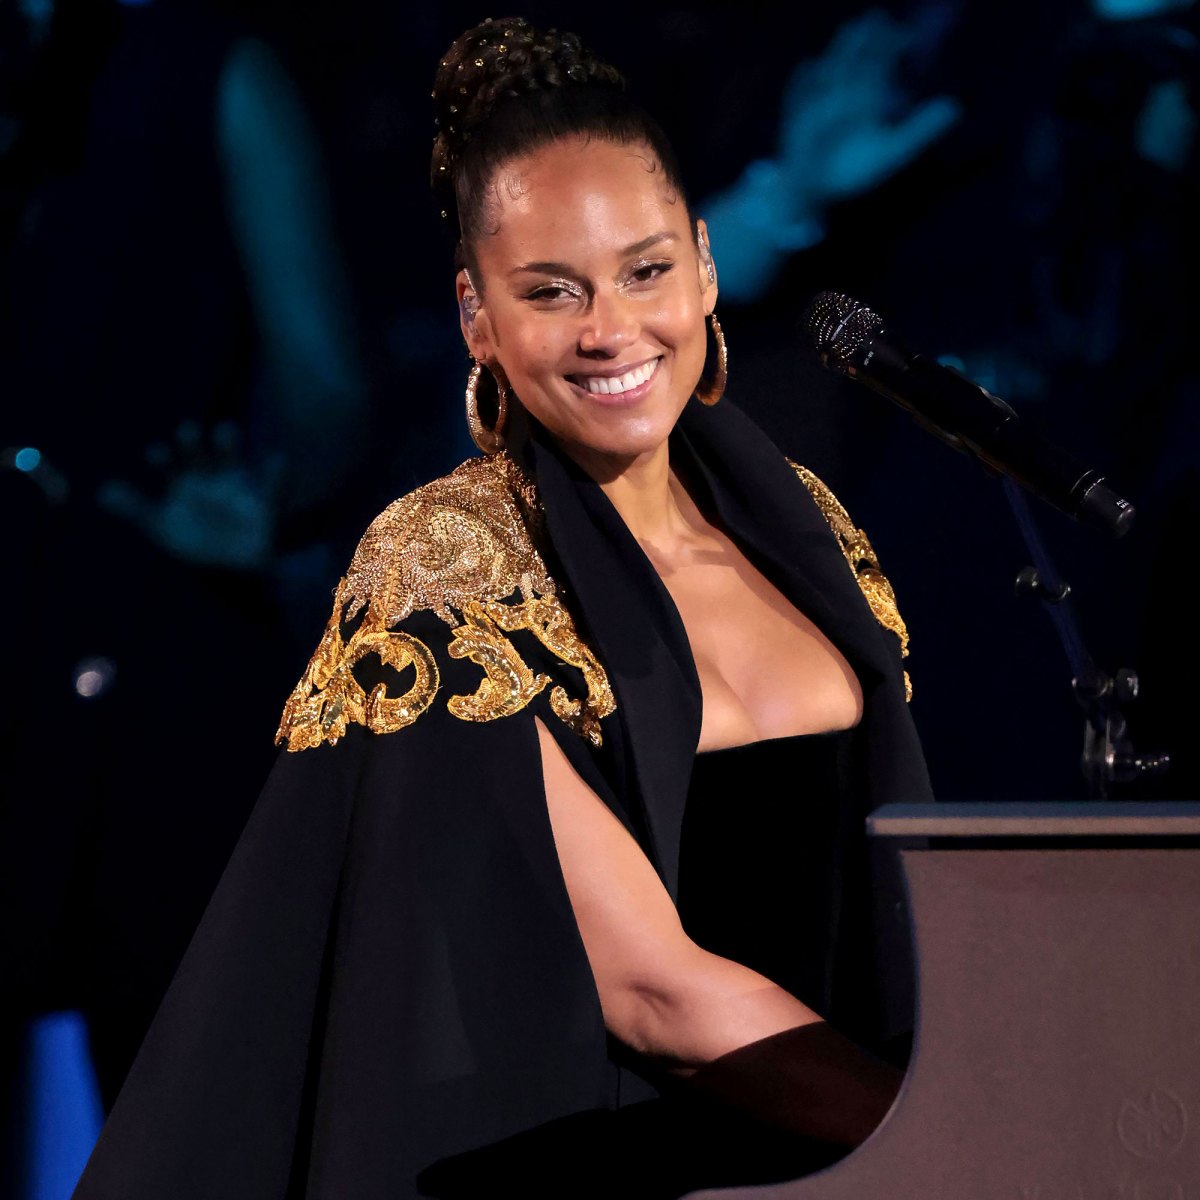 Alicia Keys: Queen Elizabeth II Requested 'Every Song' at Jubilee